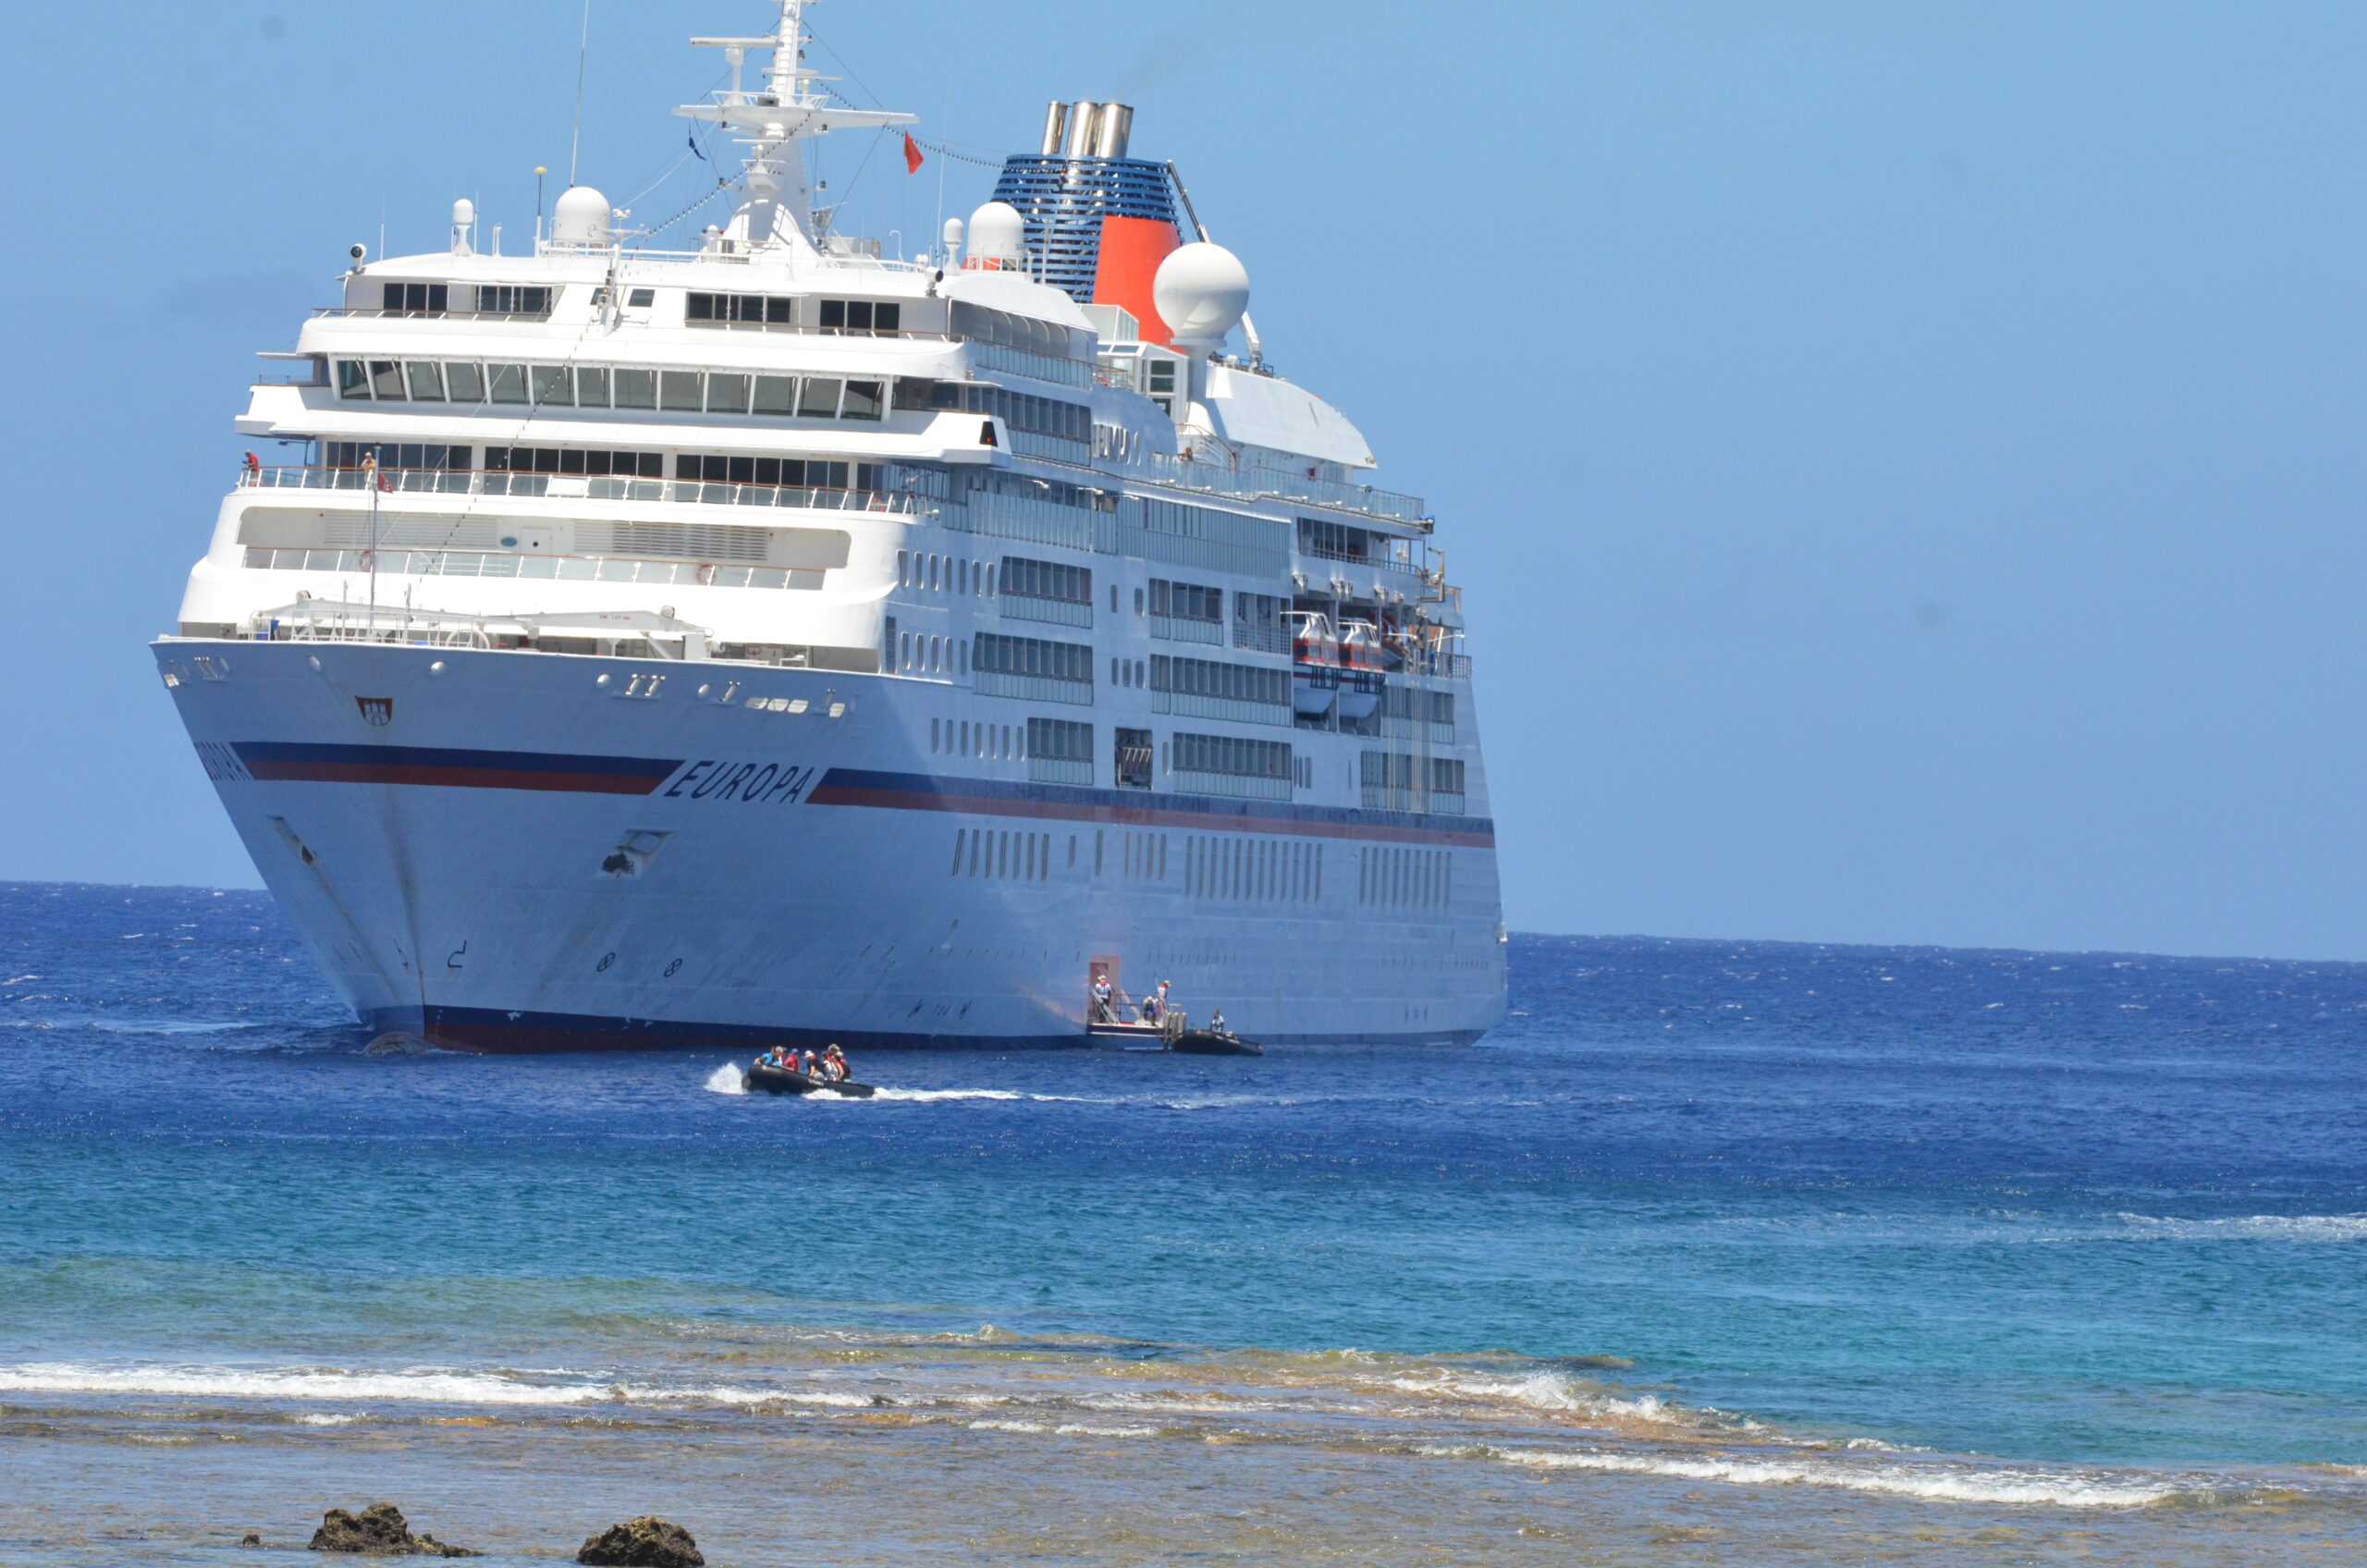 Cruise ship makes detour to Palmerston with medical supplies